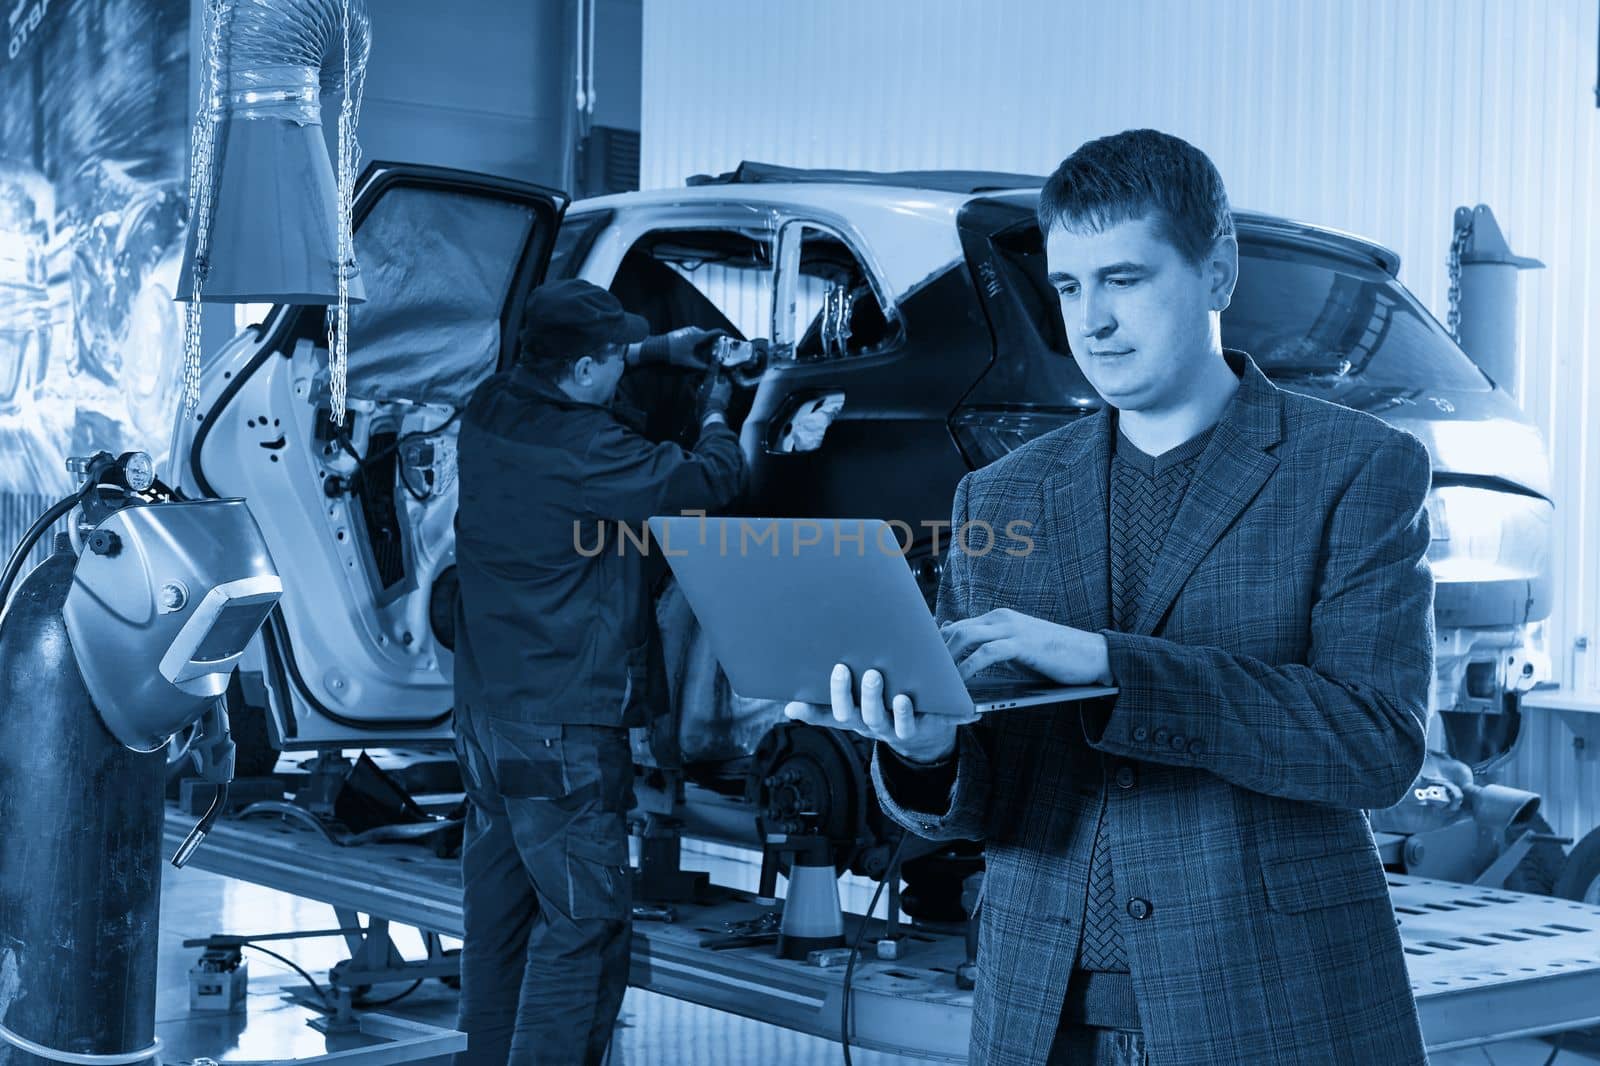 Manager holding a laptop while standing near car in auto repair shop with mechanic repairing car on background